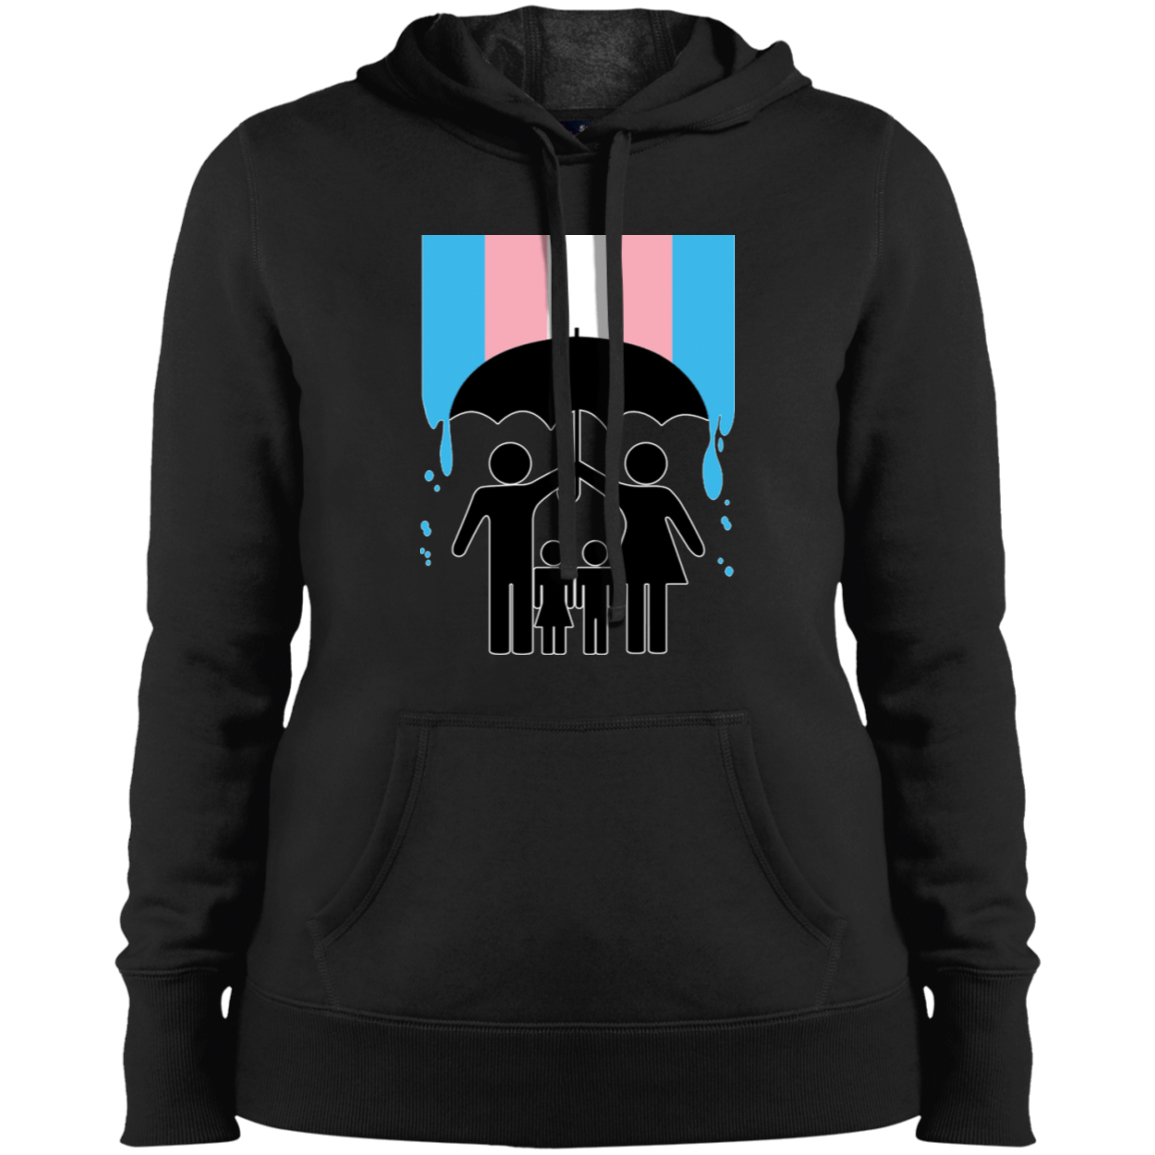 "Protect Family" Ladies' Pullover Hooded Sweatshirt